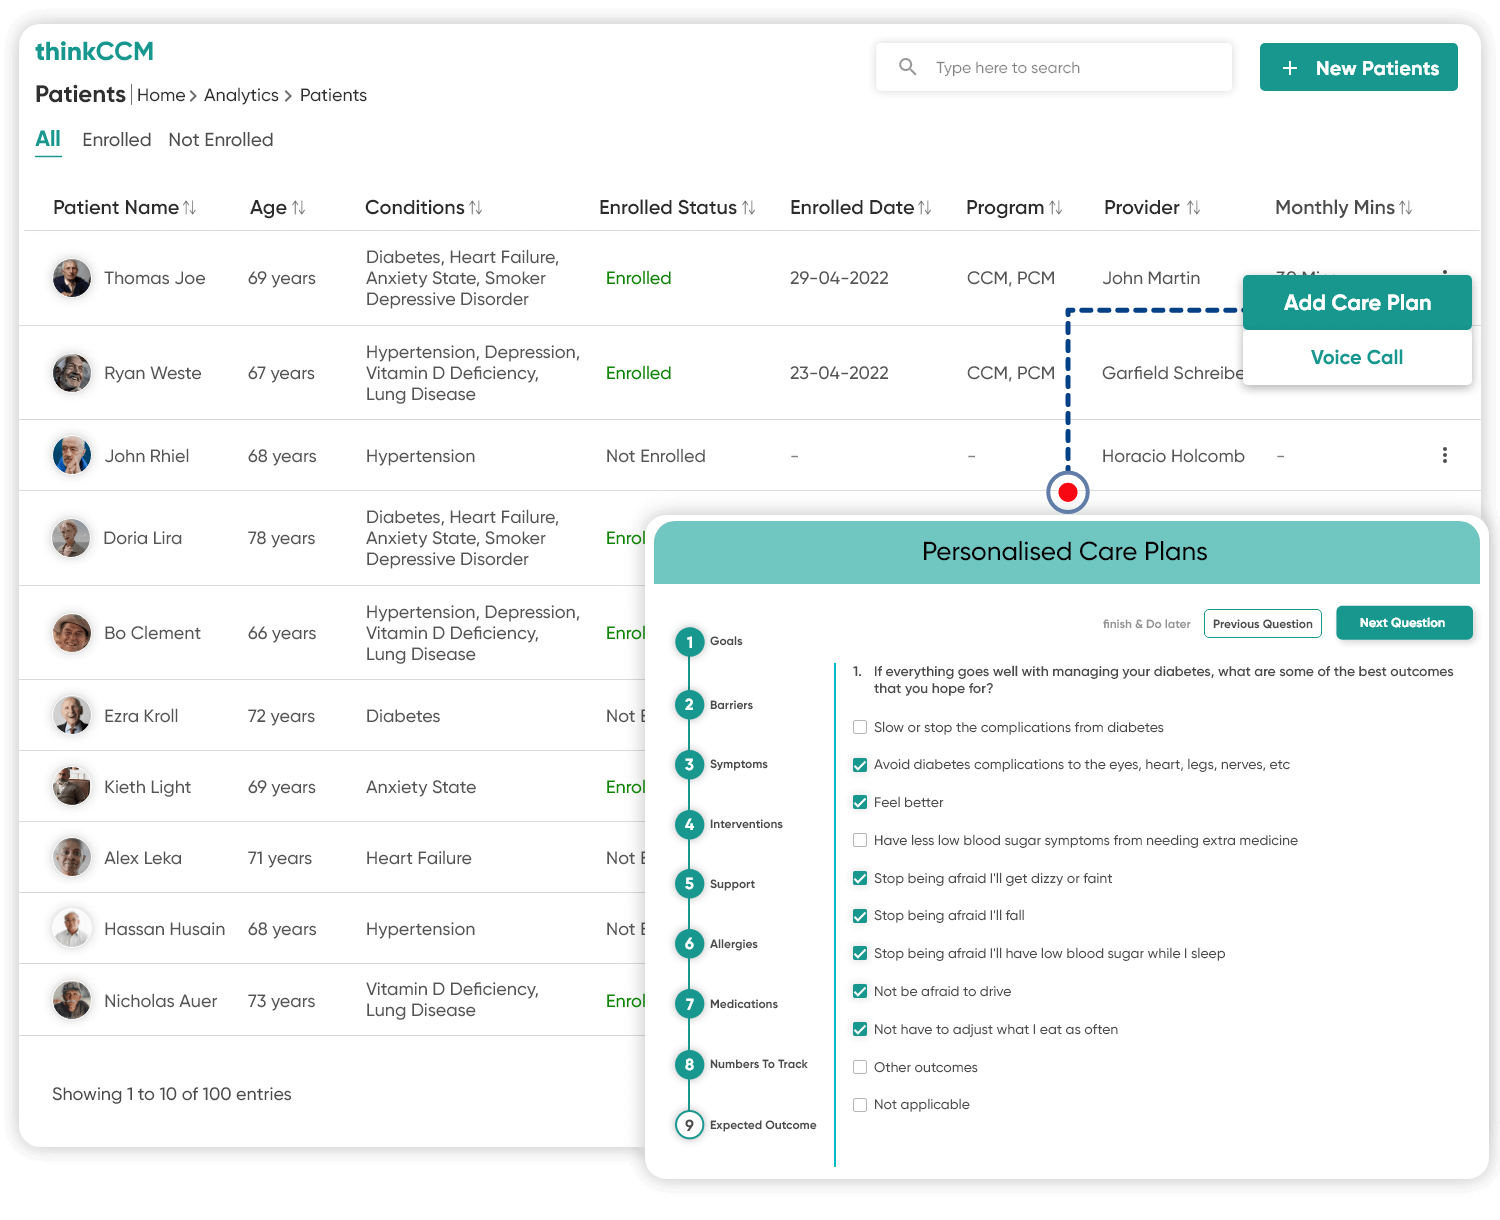 Chronic care application dashboard- List all patients enrolled in the CCM program with the ability to customize a care plan for each patient.